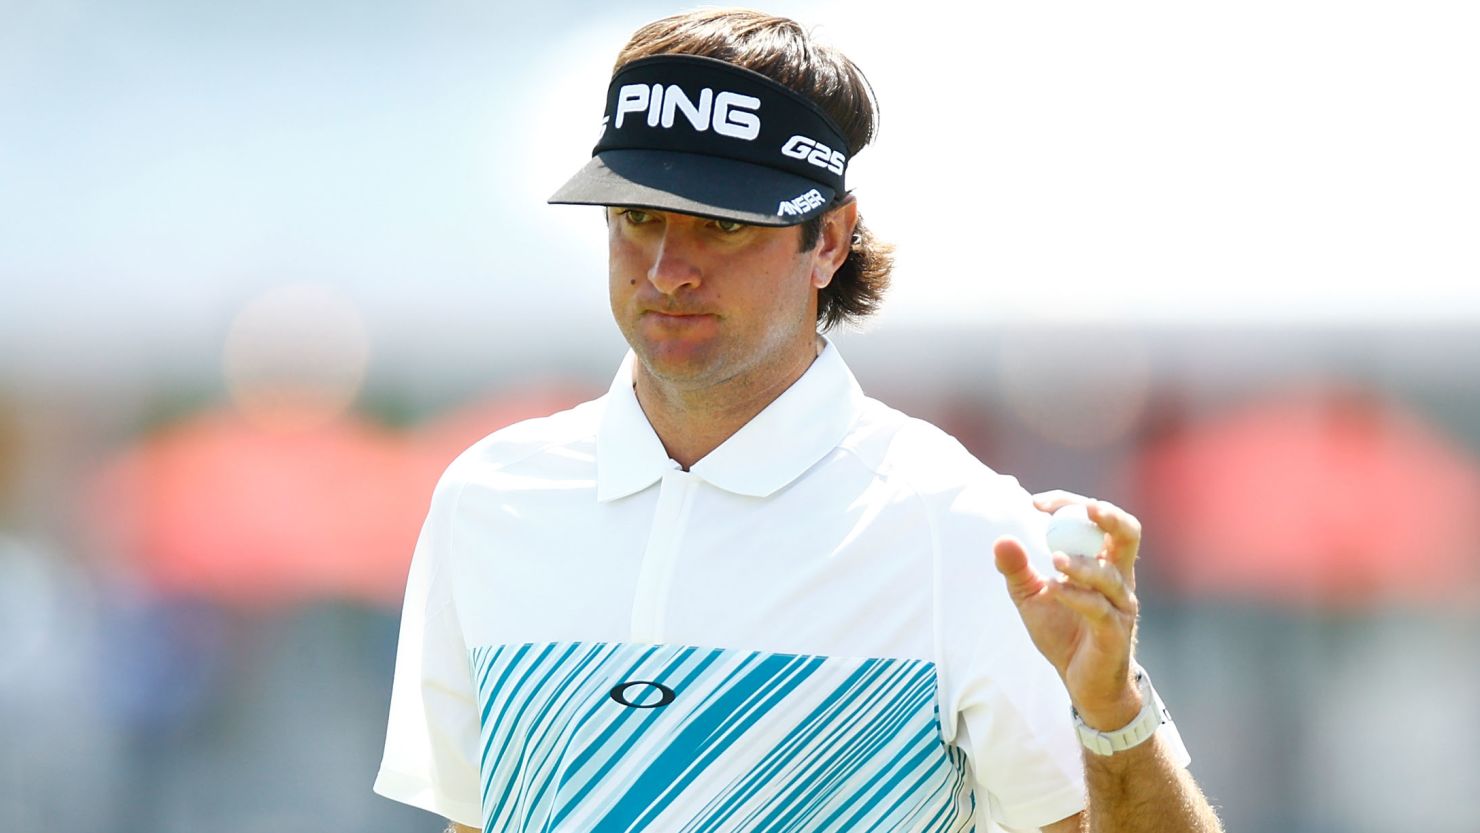 Bubba Watson shares the lead going into the final round of the Travelers Championship in Connecticut. 